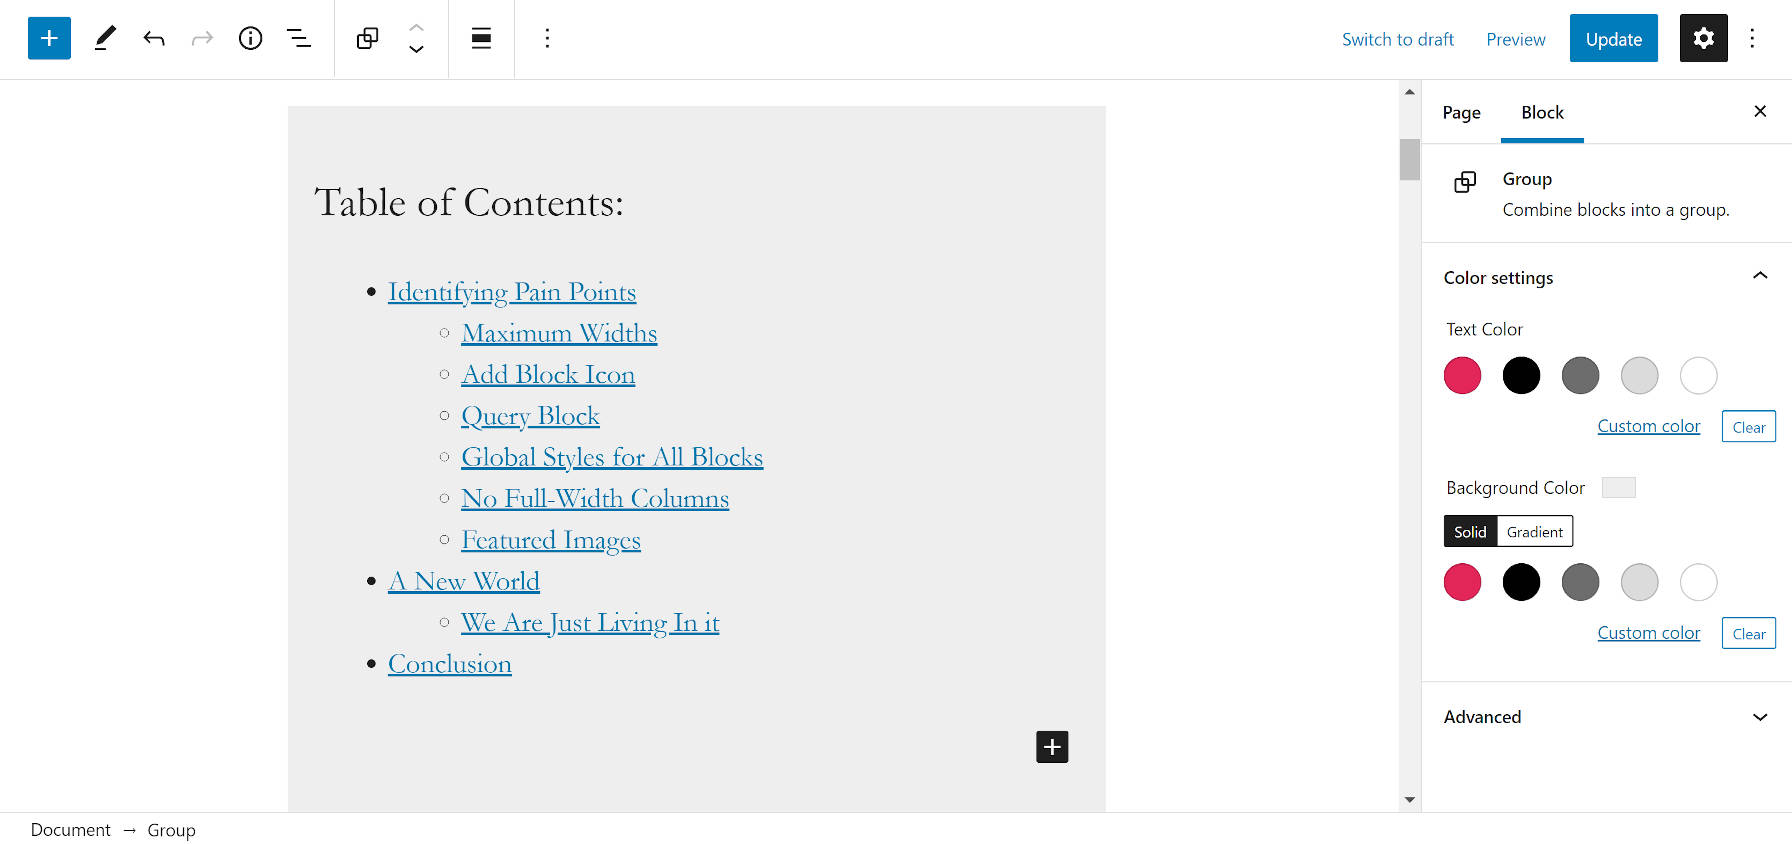 WordPress post editor with a highlighted section showing a table of contents area for the post.